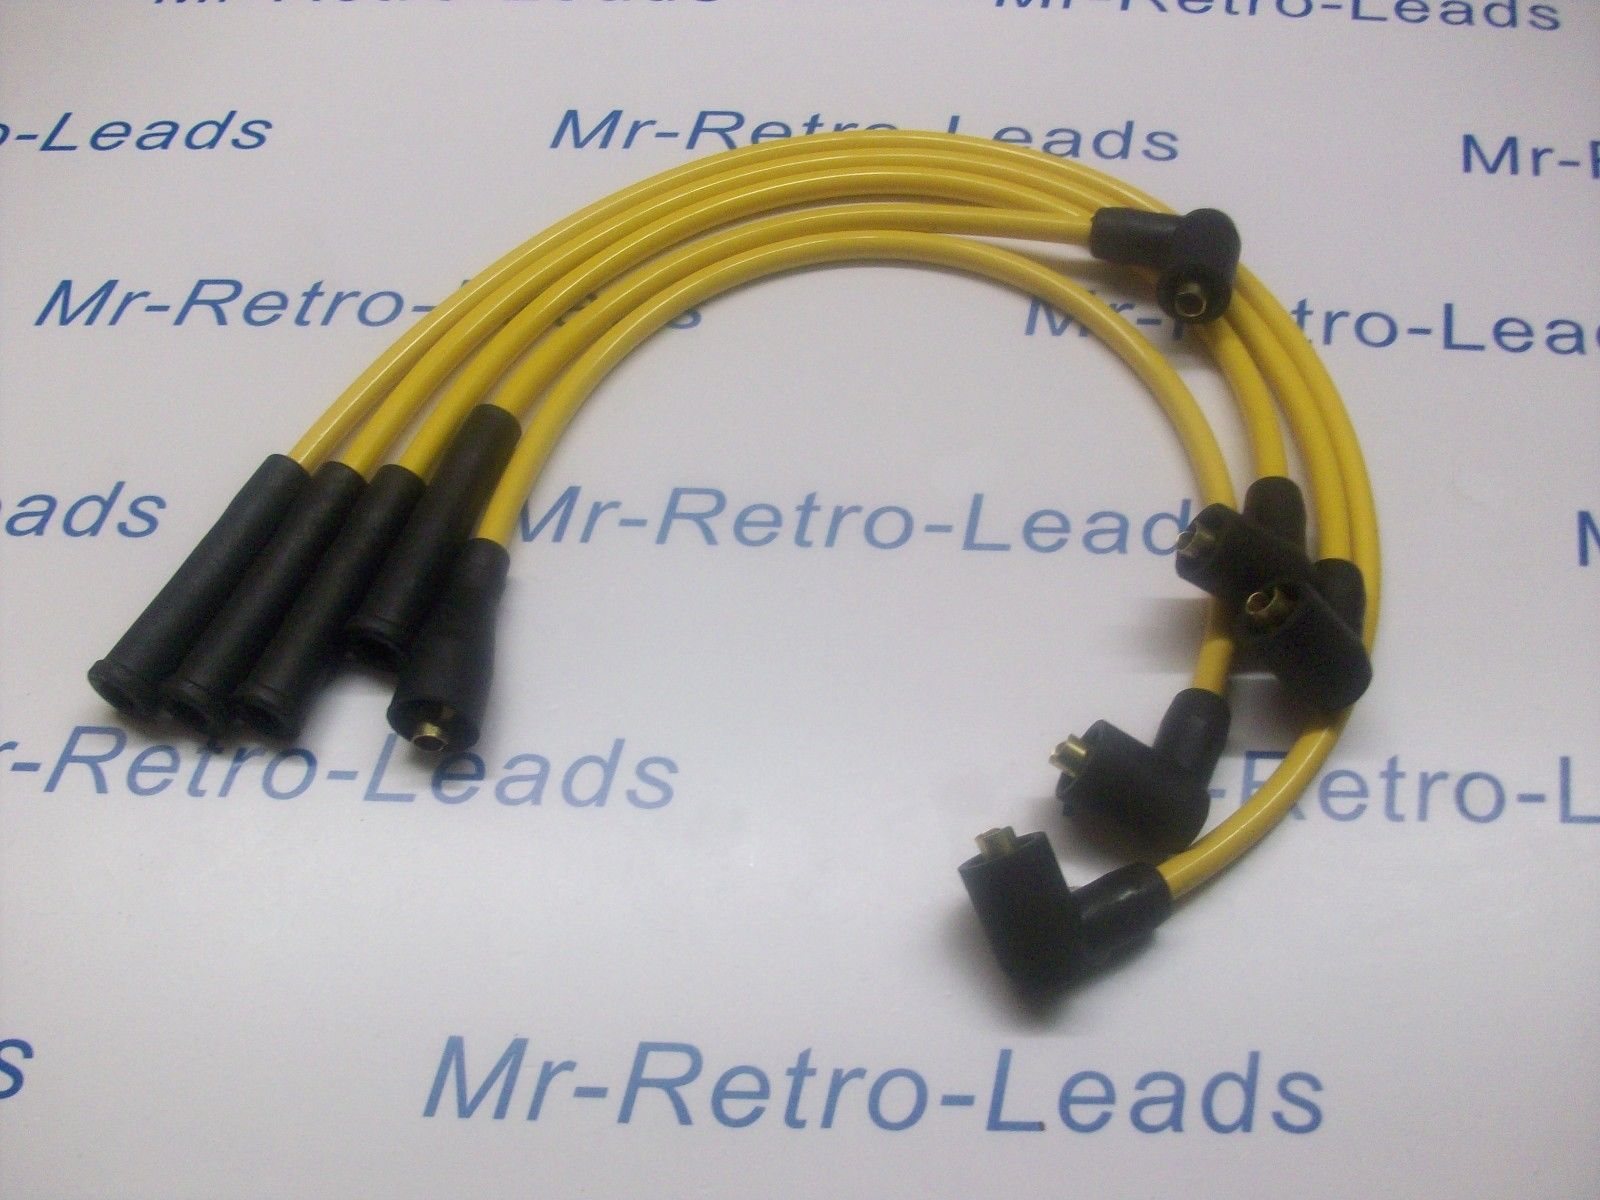 Yellow 8mm Performance Ignition Leads For Opel Manta Quality Hand Built Leads Ht